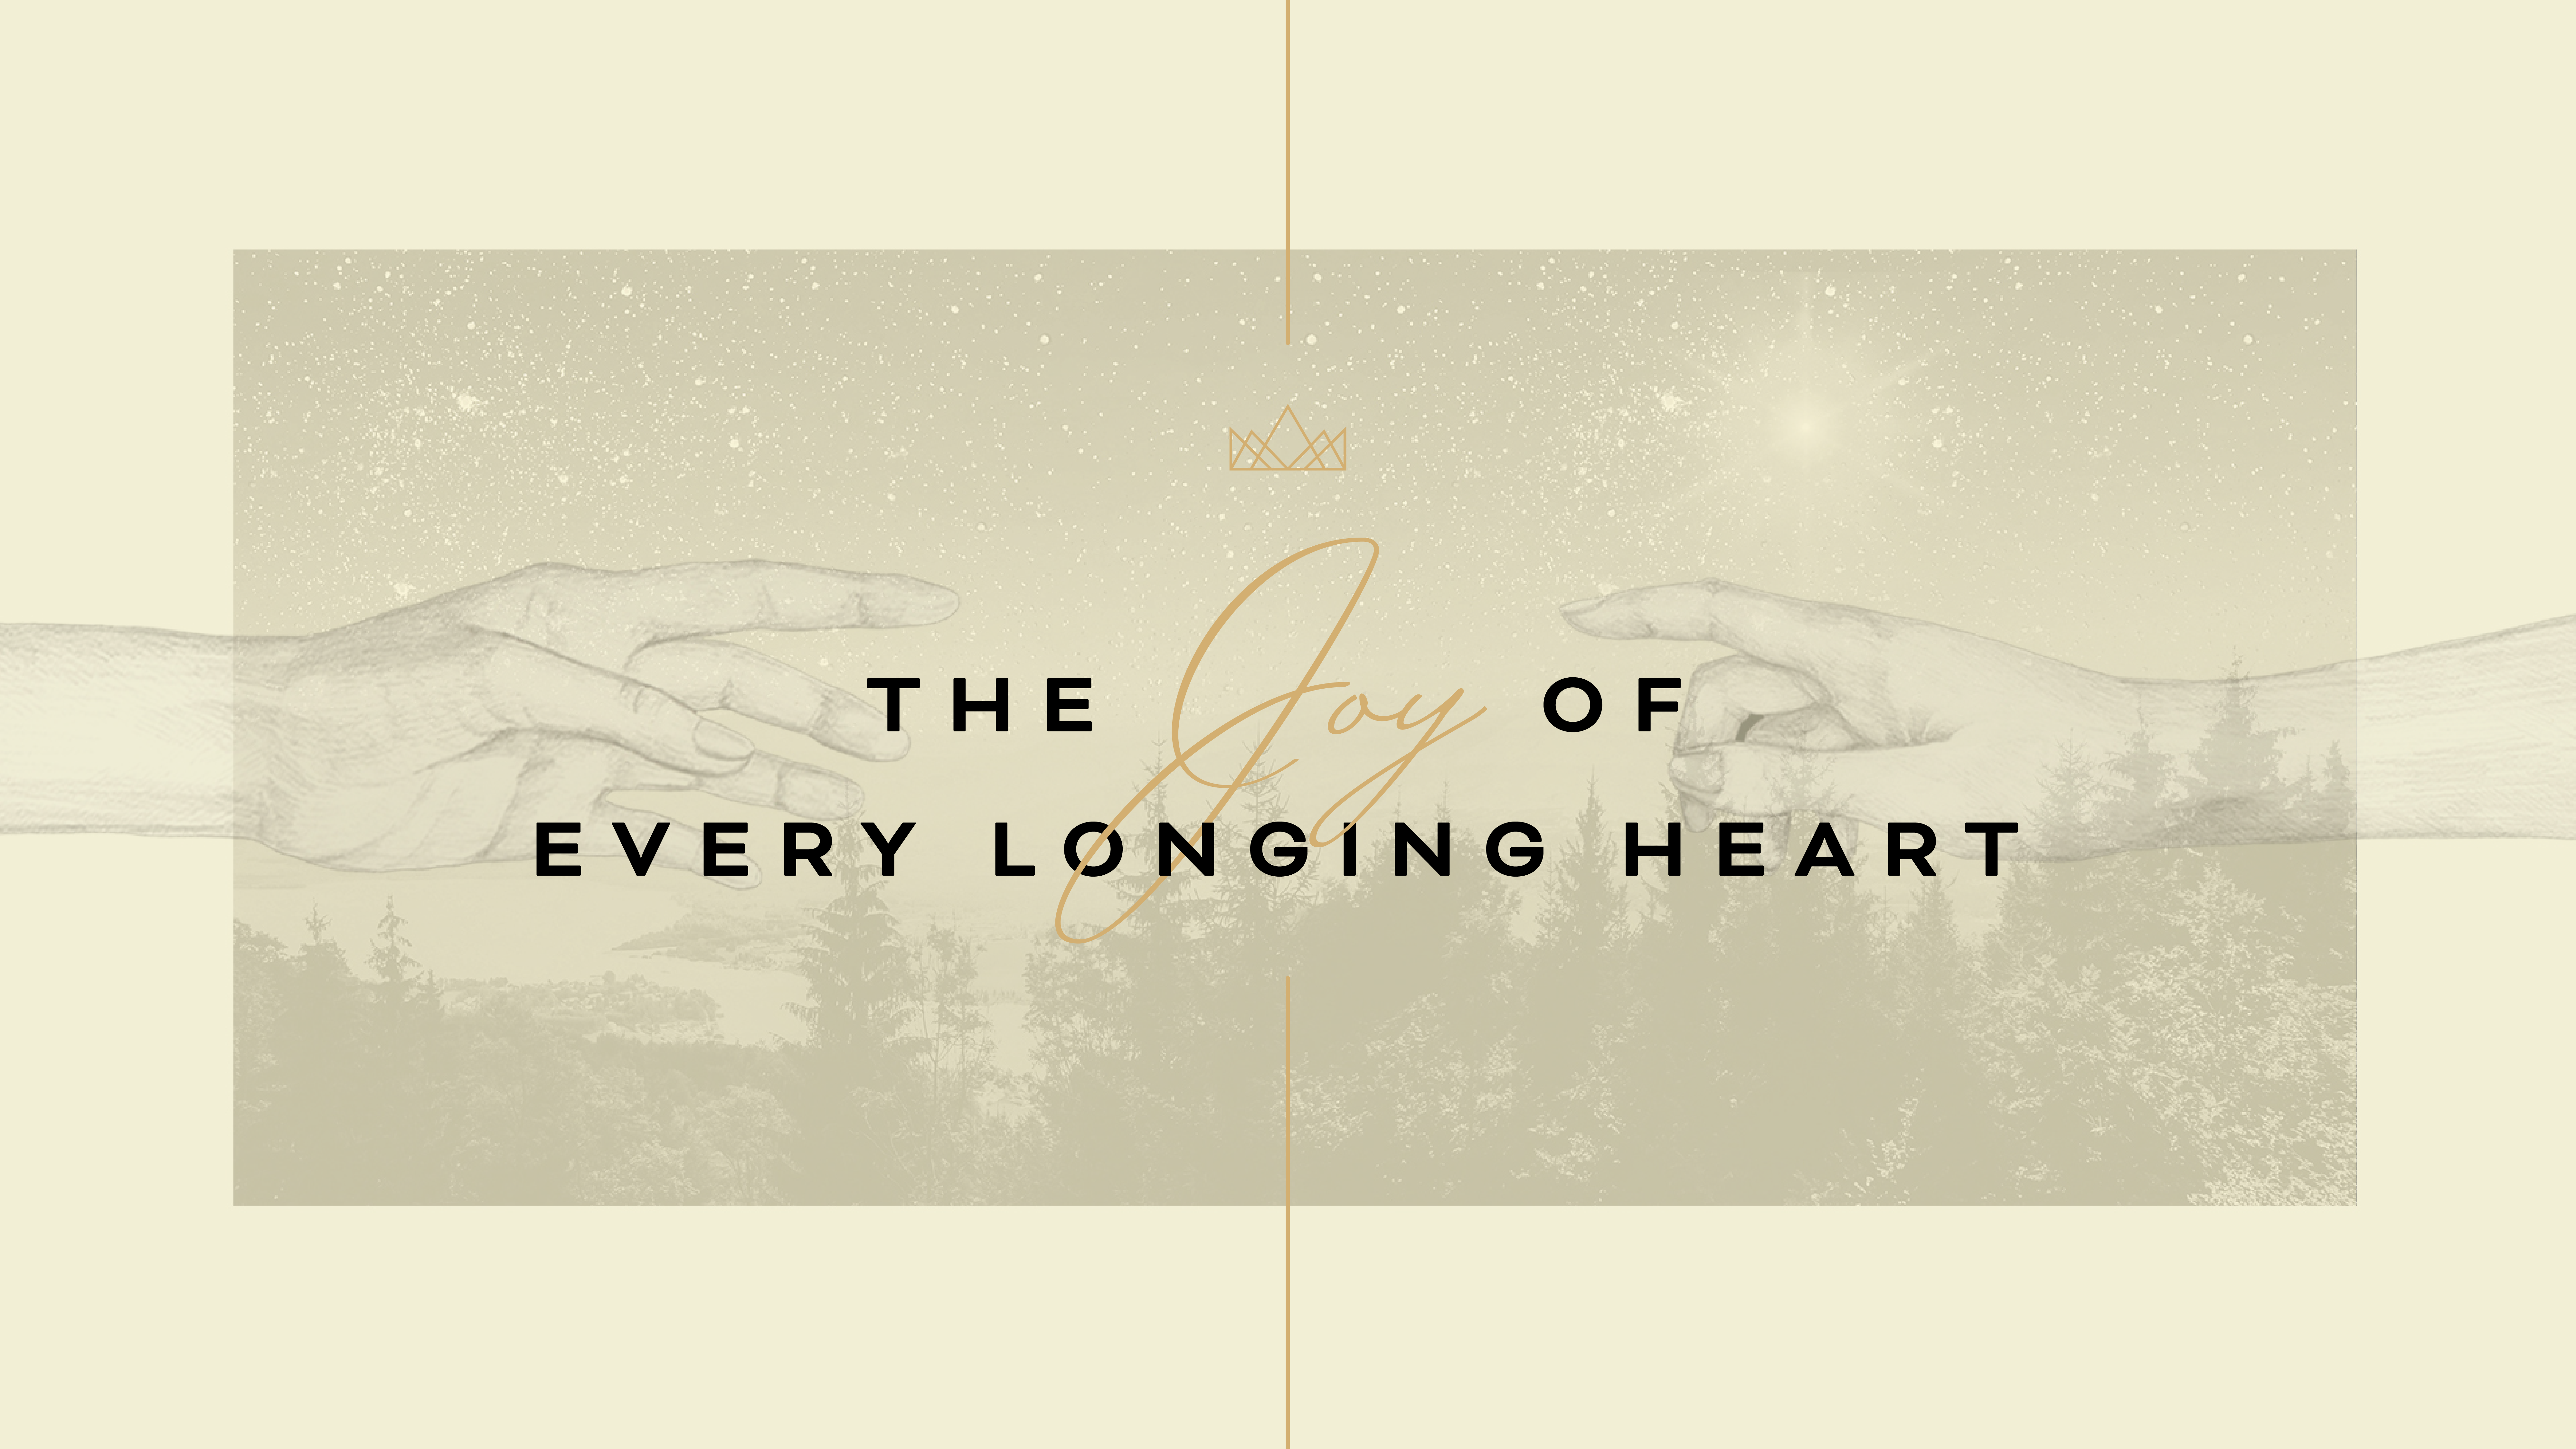 The Joy of Every Longing Heart